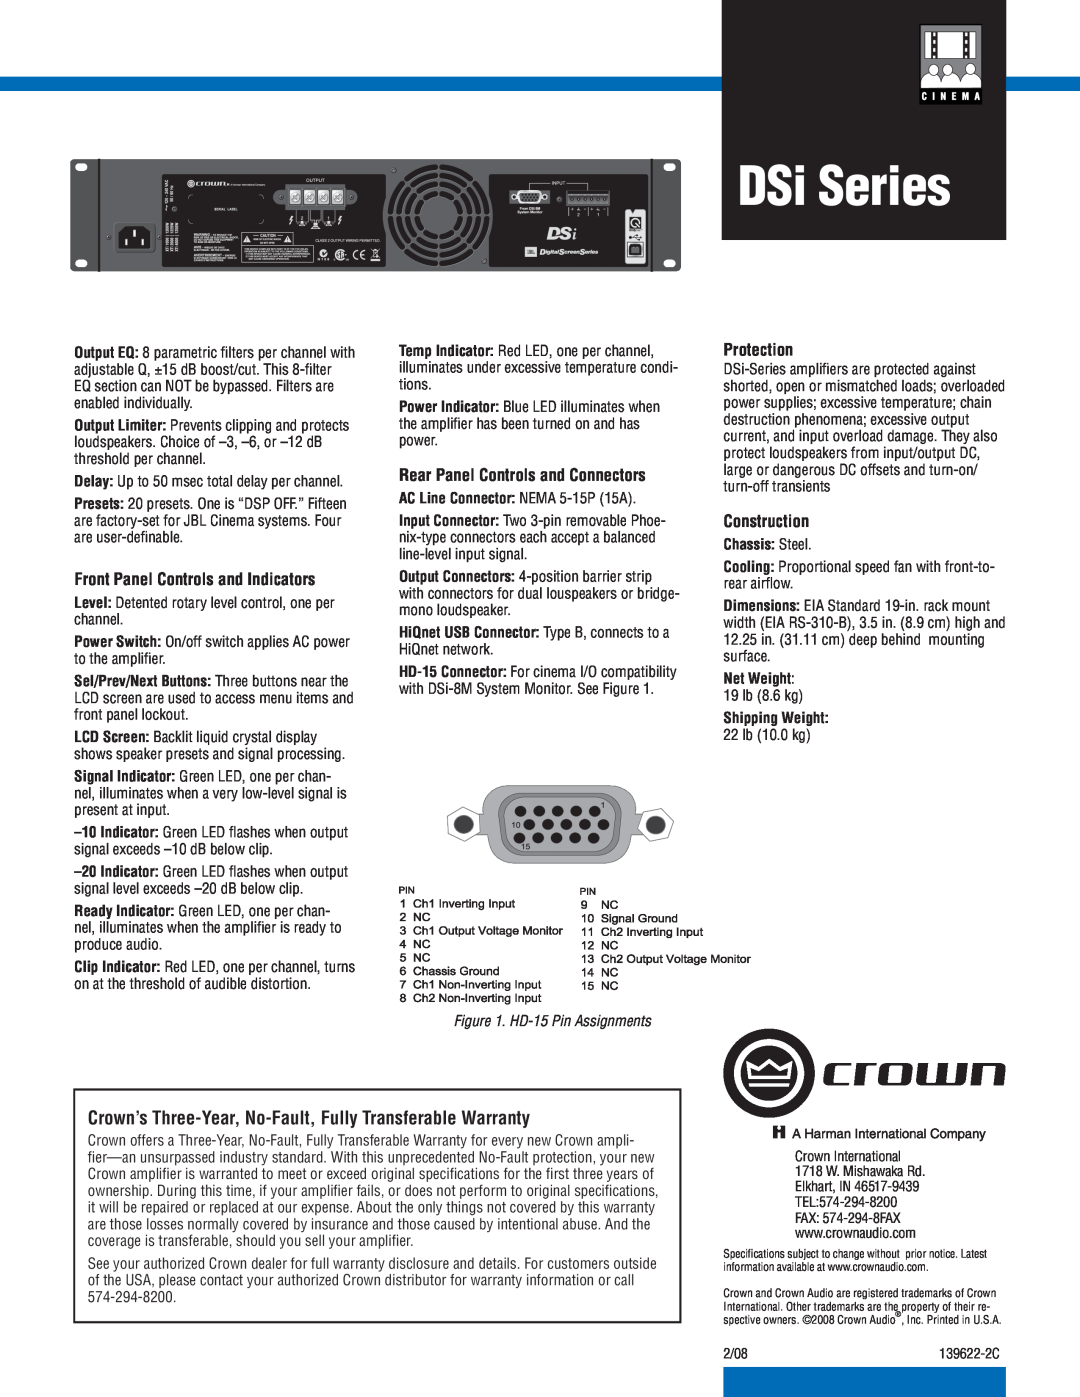 Crown Audio DSi Series Front Panel Controls and Indicators, Rear Panel Controls and Connectors, Protection, Construction 